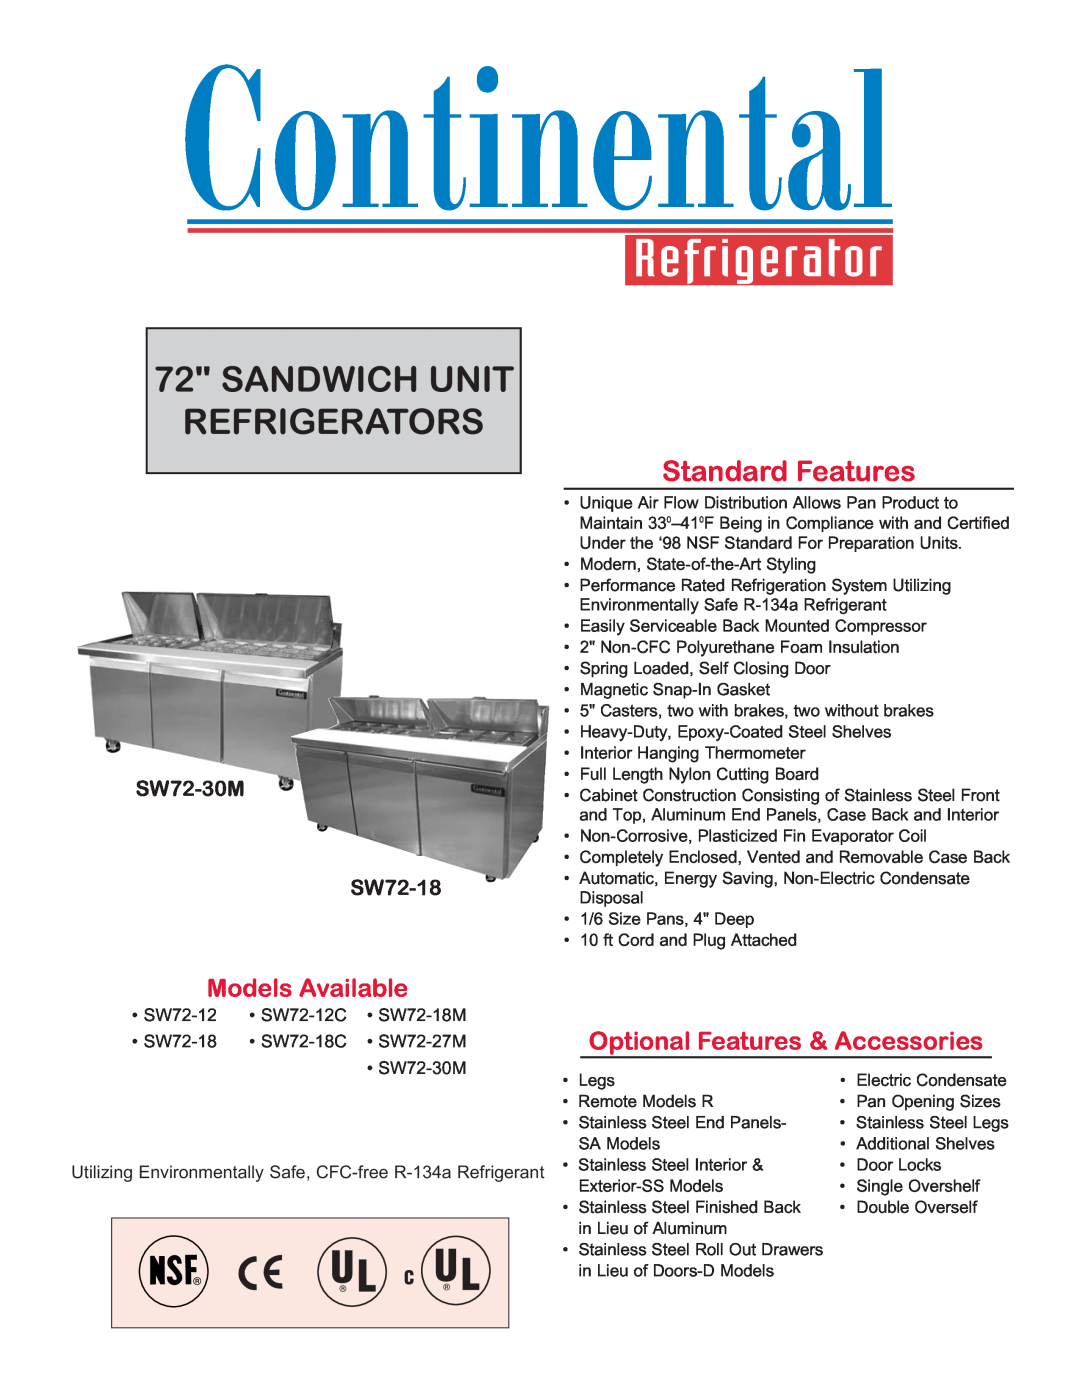 Continental Refrigerator manual Sandwich Unit Refrigerators, Standard Features, Models Available, SW72-30M SW72-18 